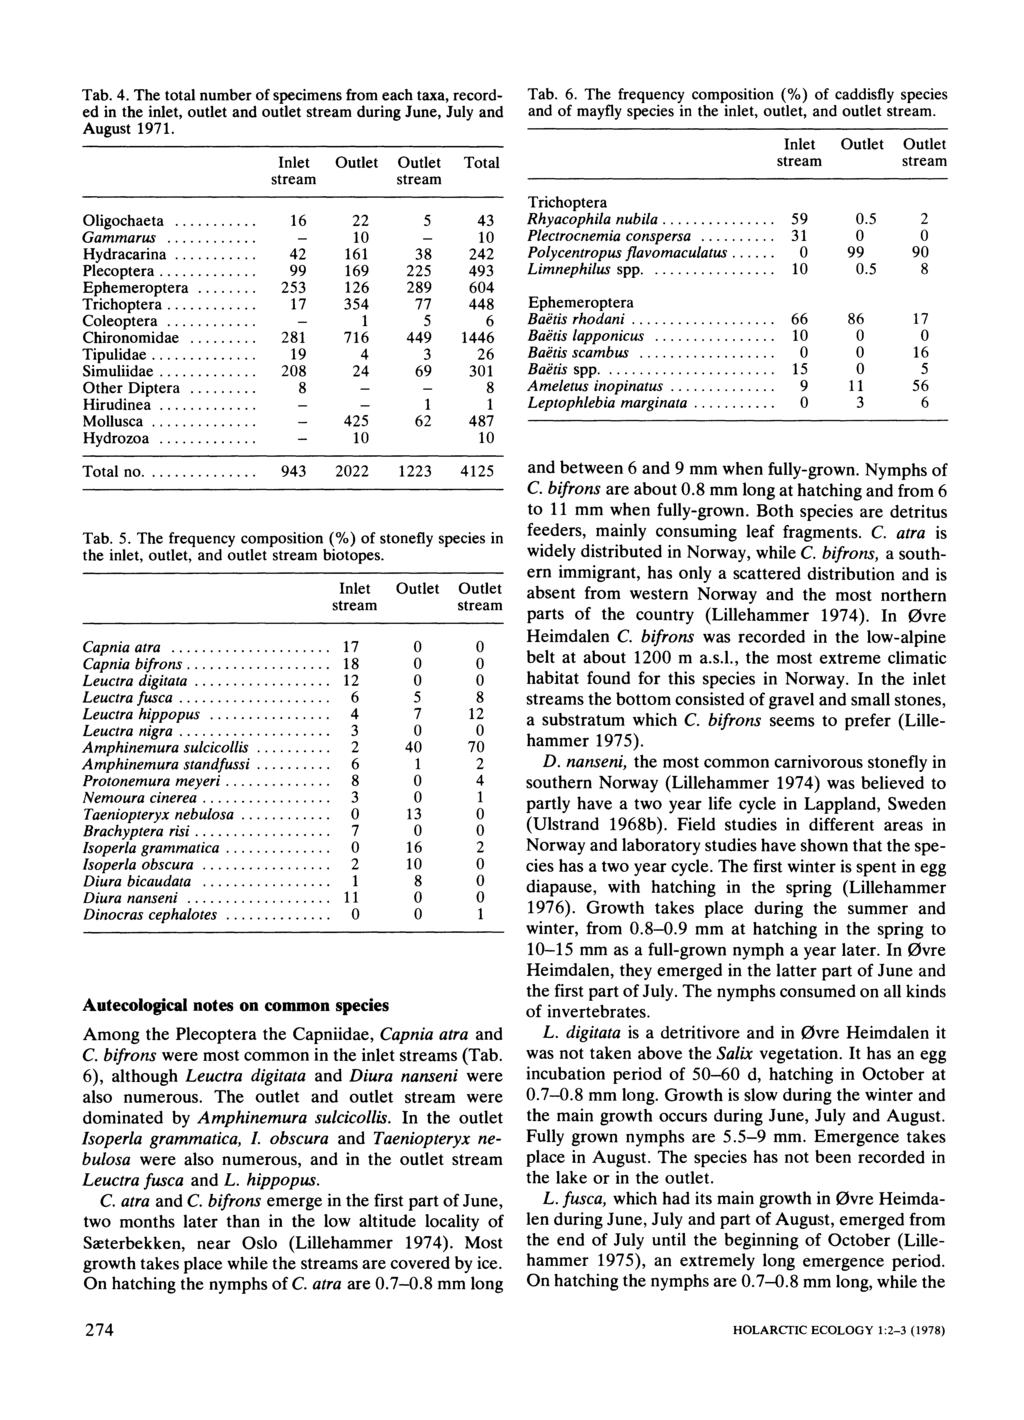 Tab. 4. The total number of specimens from each taa, recorded in the inlet, outlet and outlet stream during June, July and August 1971. Inlet Outlet Outlet Total stream stream Oligochaeta.